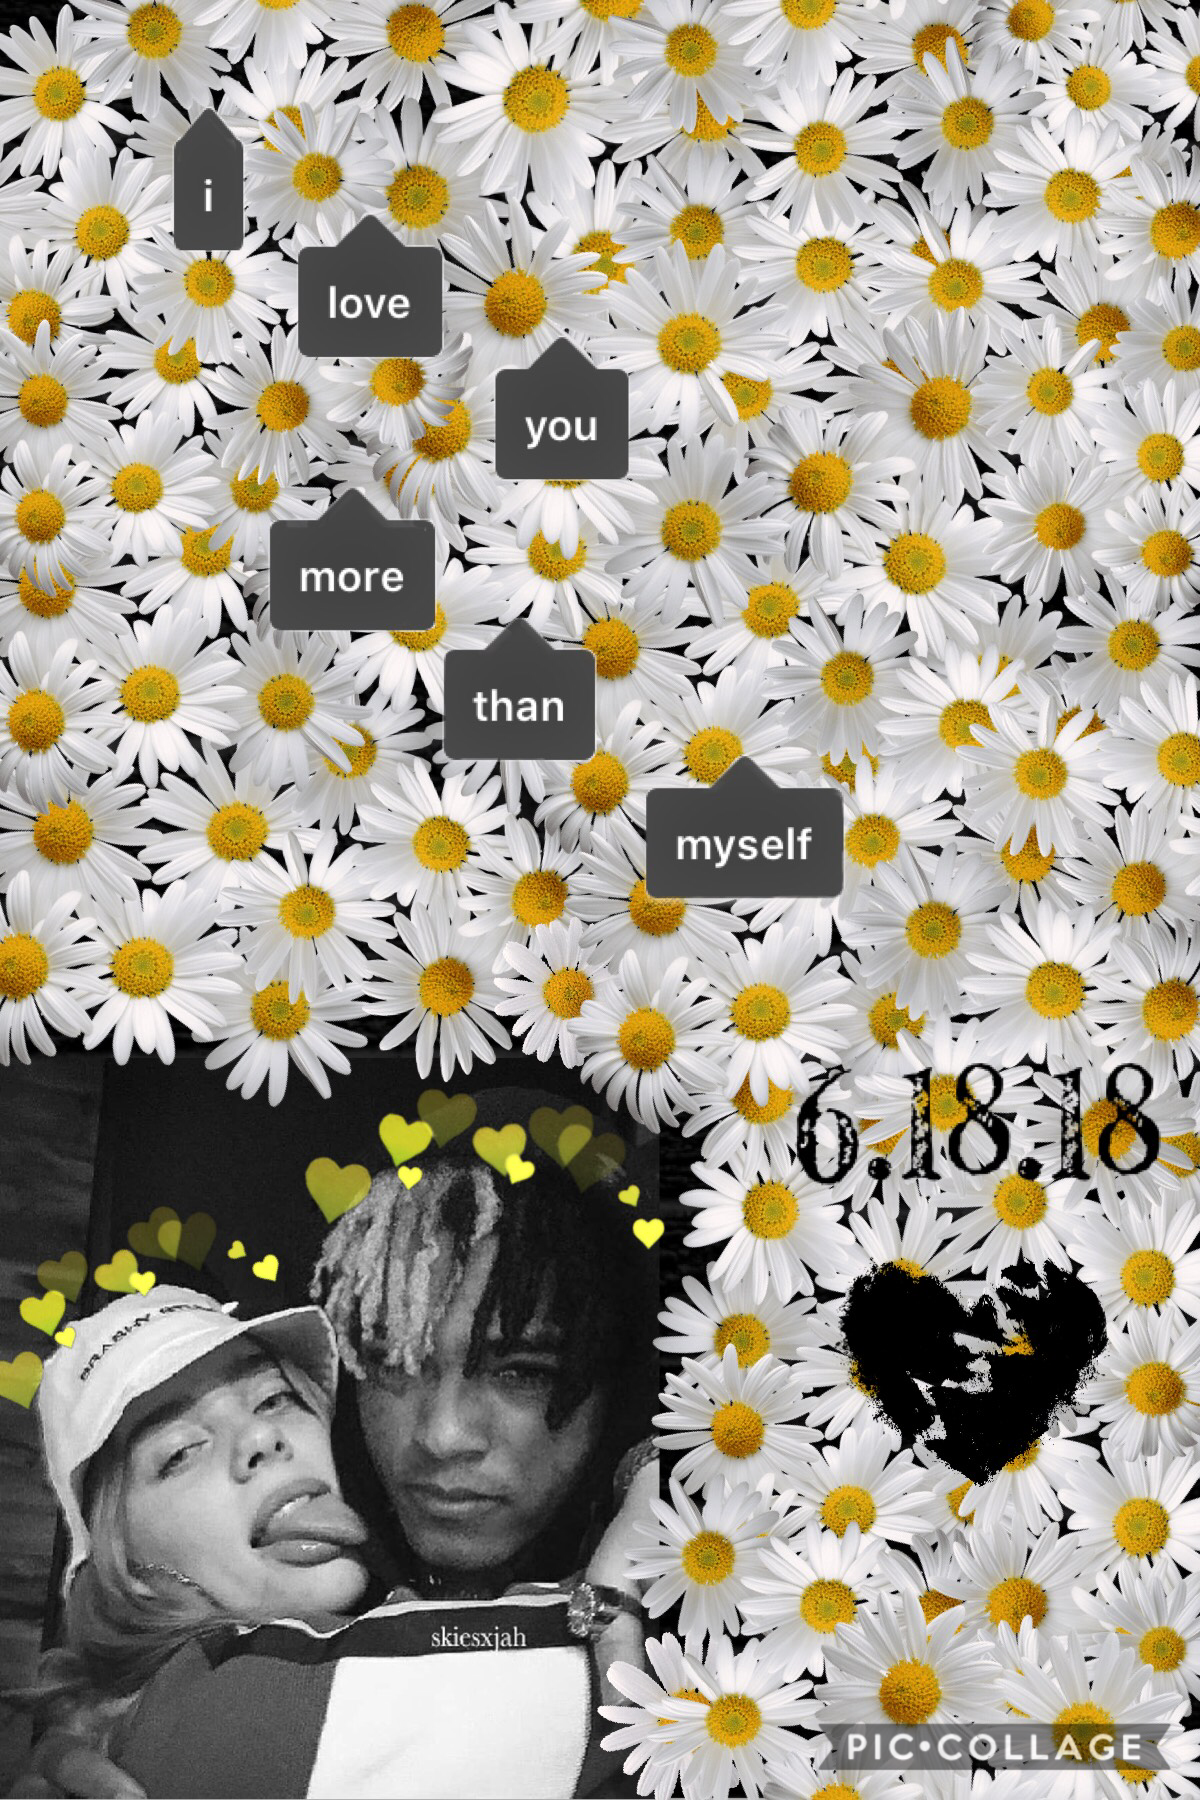 Billie and X was fa real goals💓